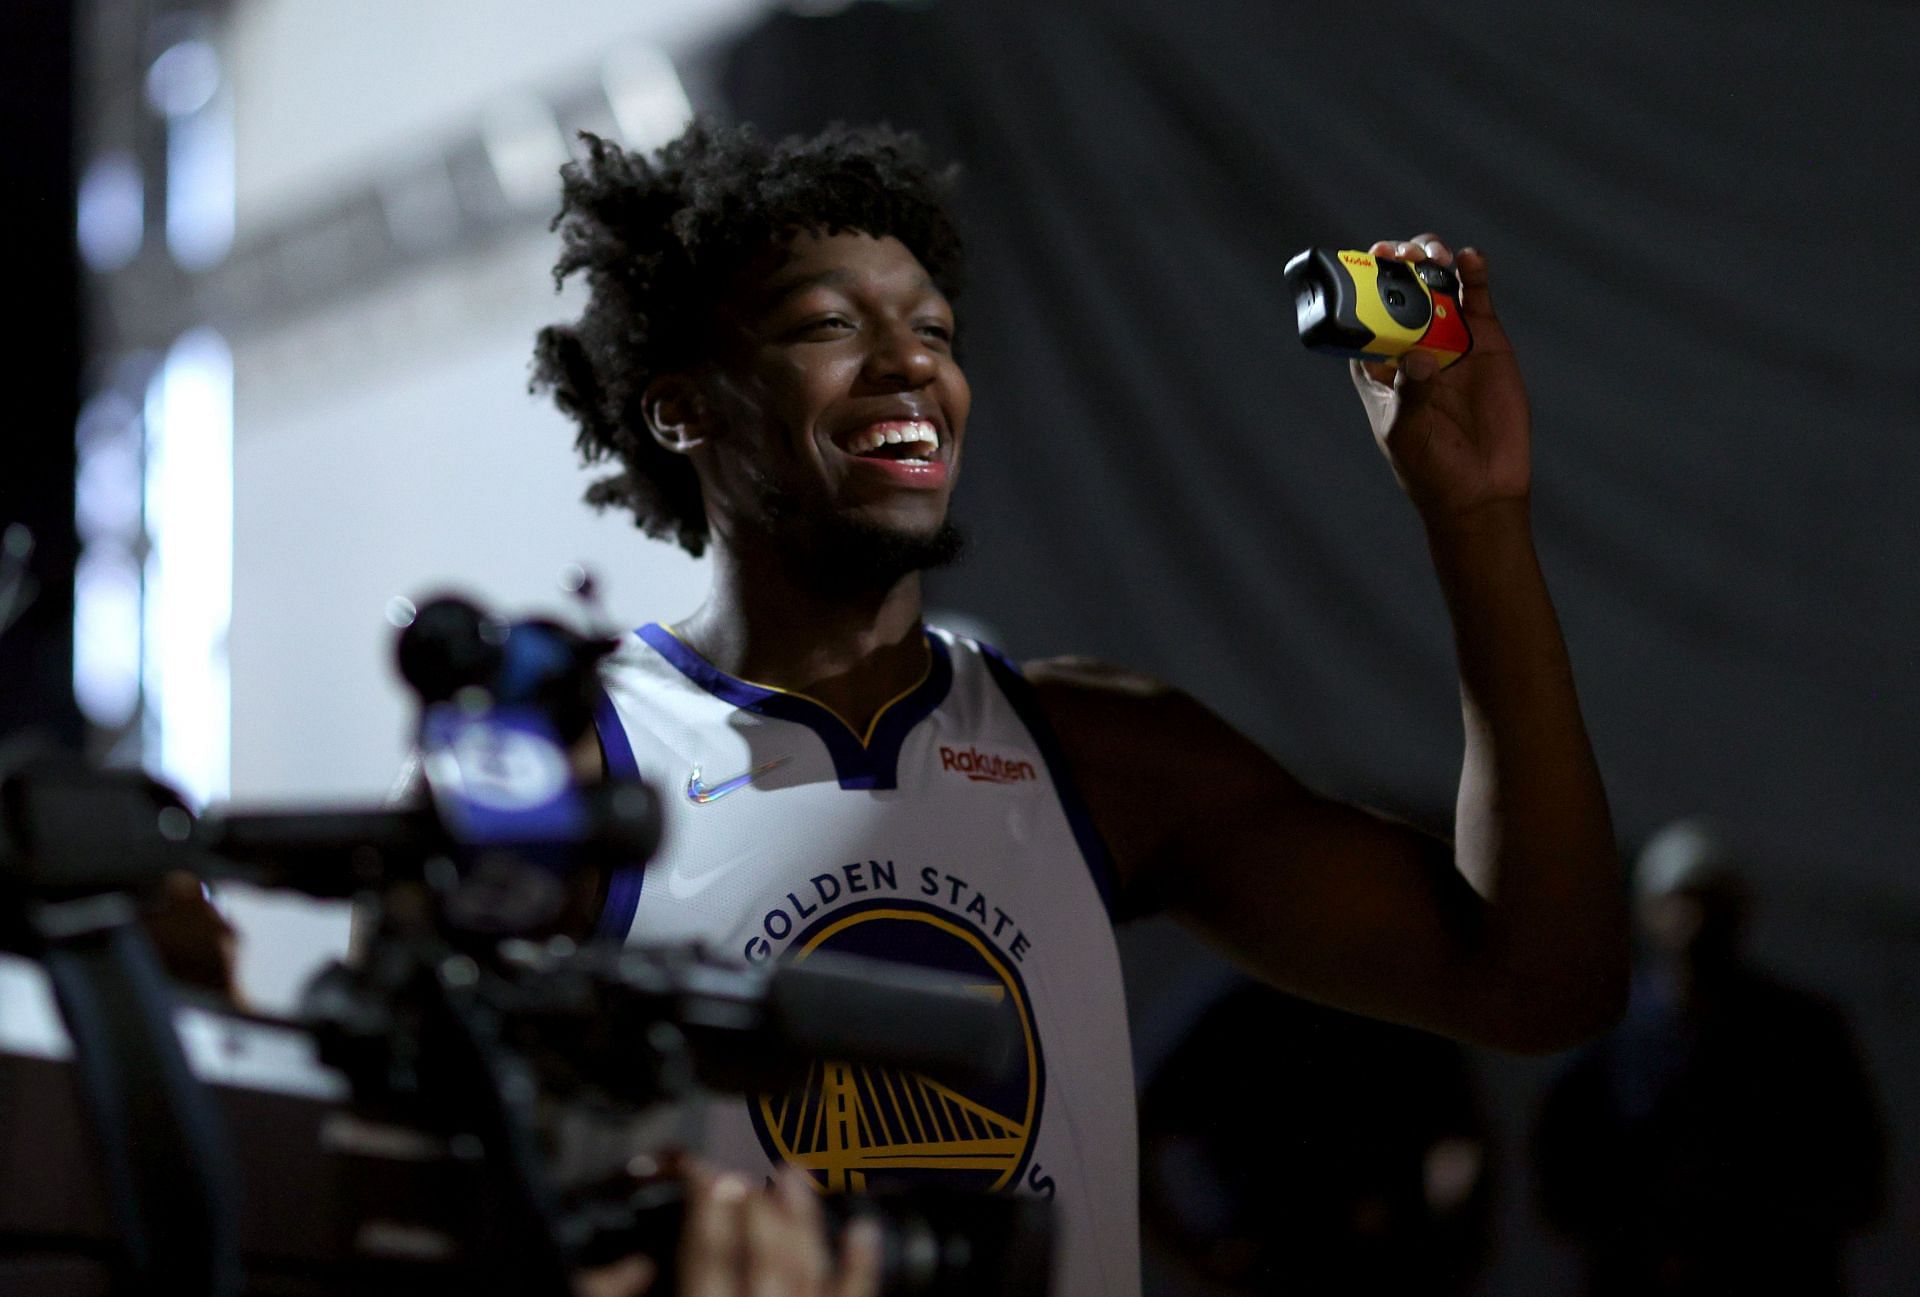 James Wiseman during the Golden State Warriors Media Day.